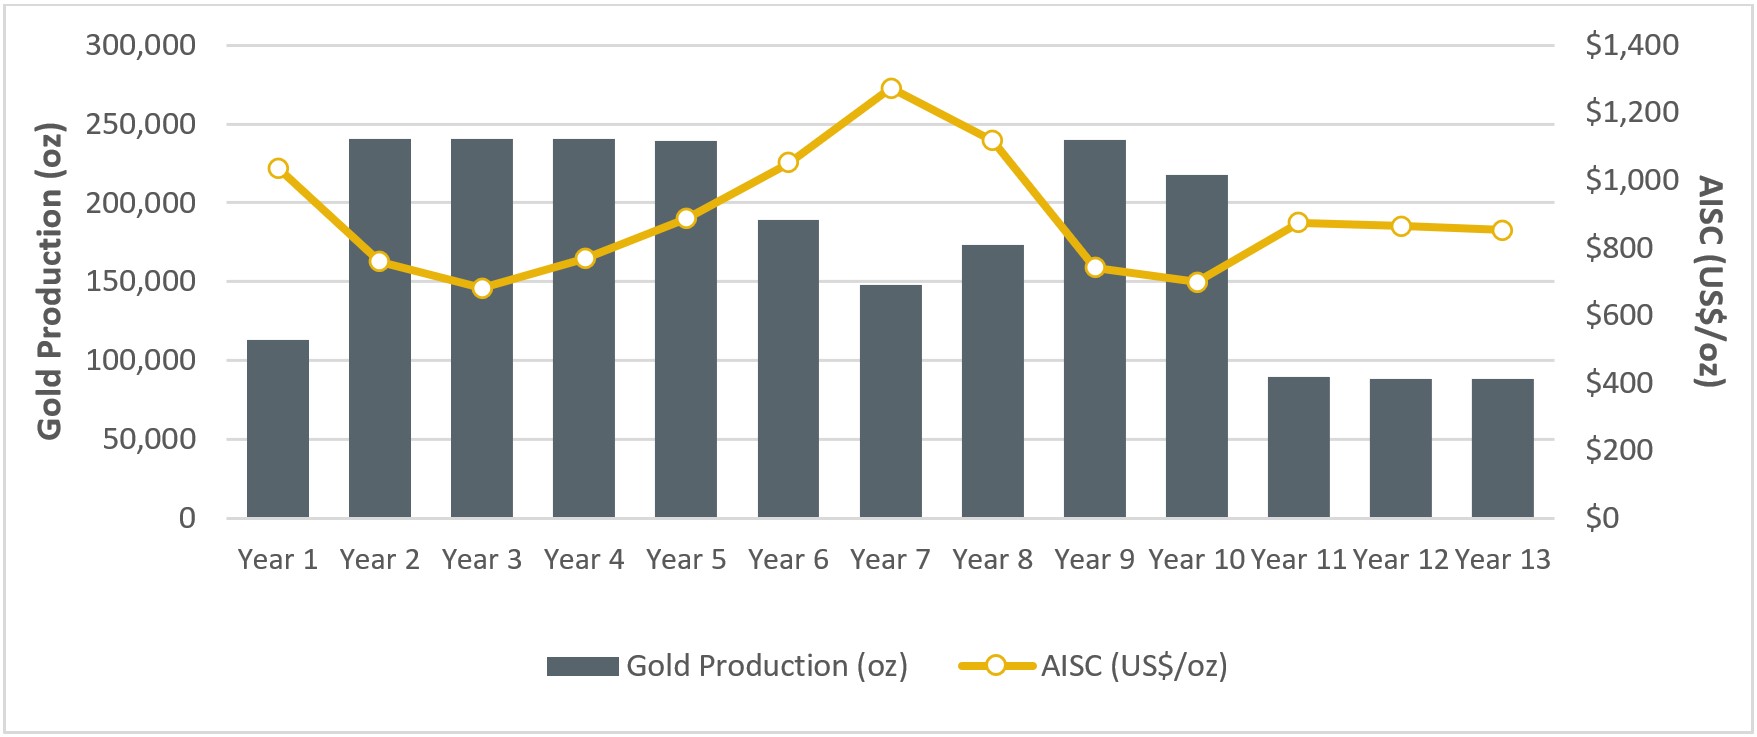 Chart 1 – Production and Cost Profile by Year